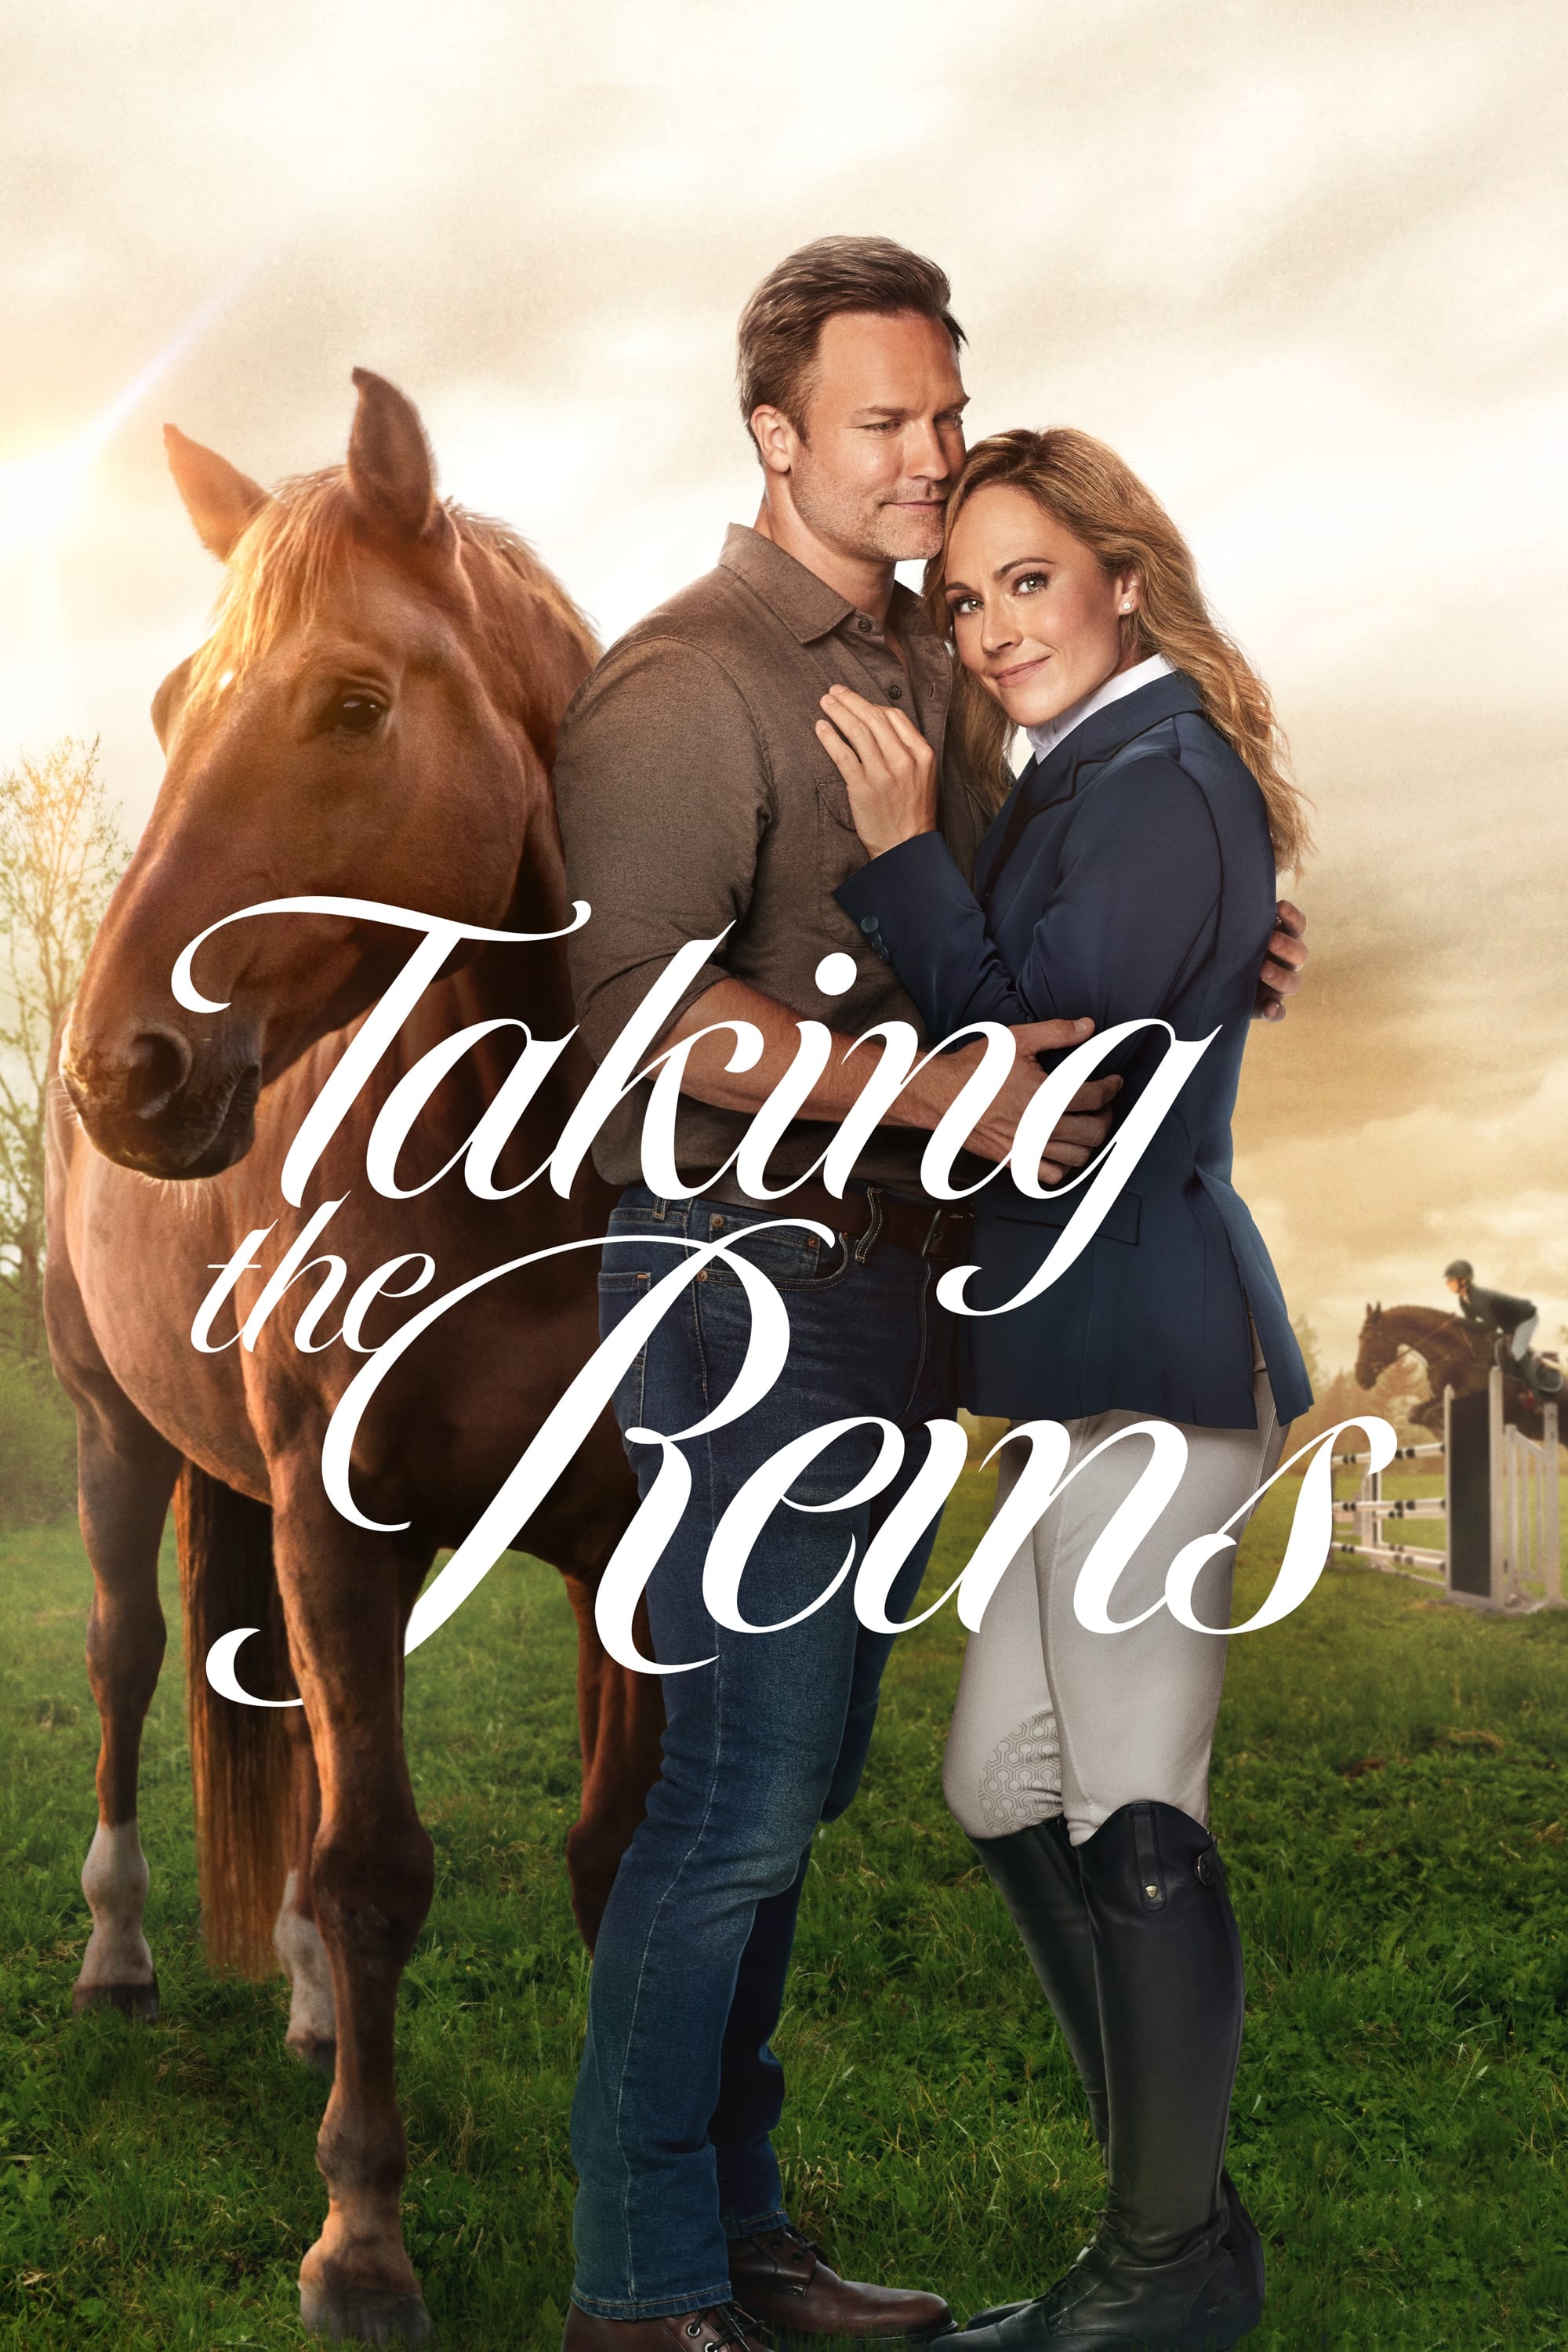 Taking the Reins (2021)